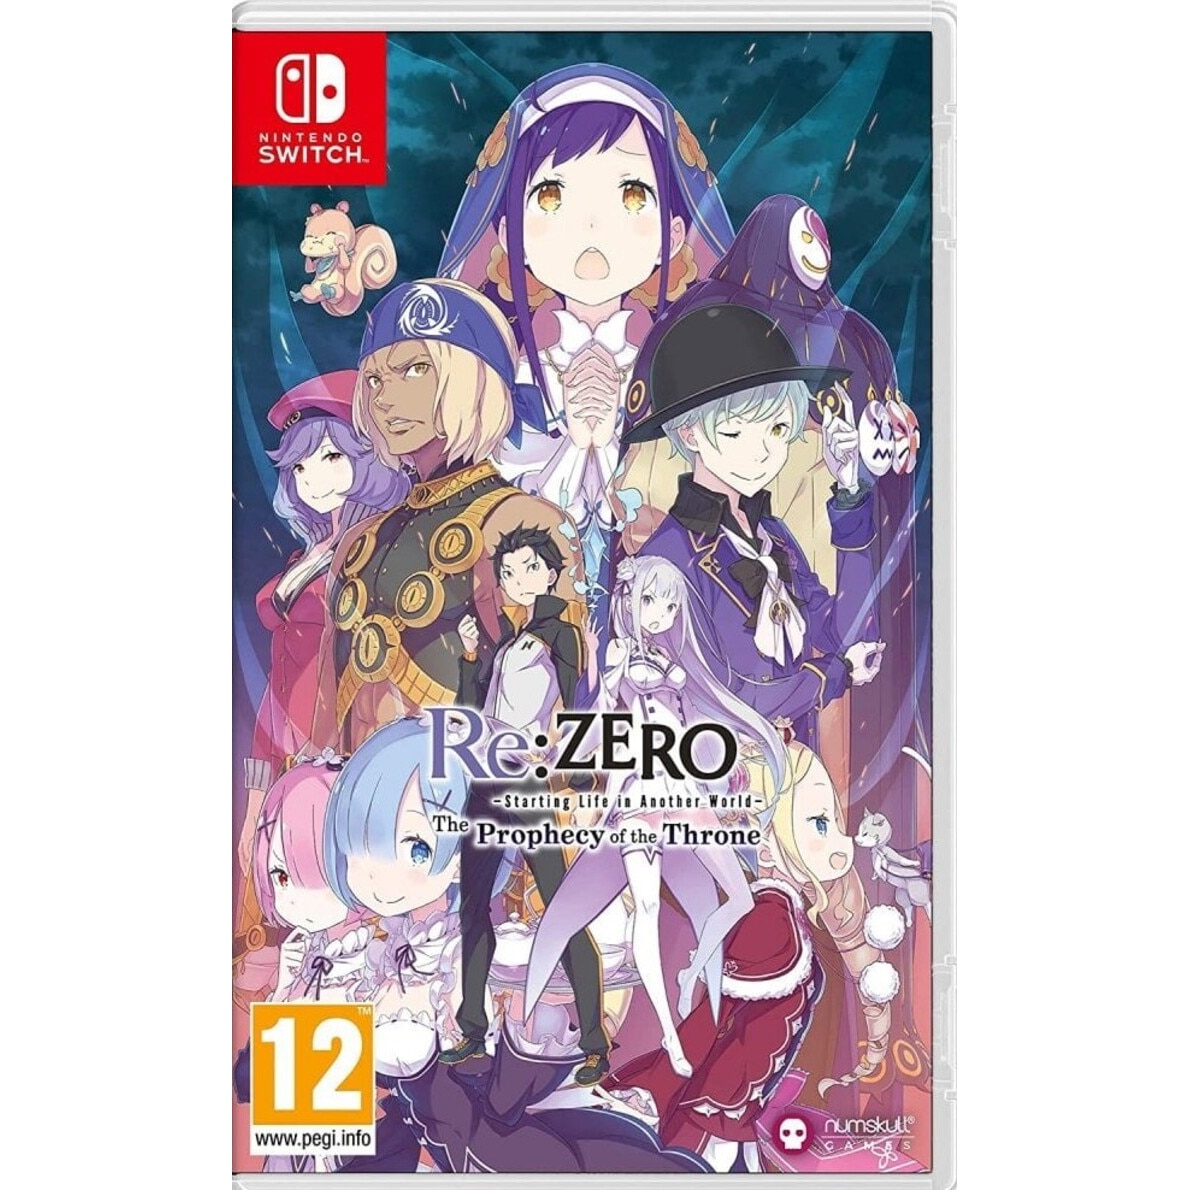 Re:Zero: the Prophecy of the Throne. Re:Zero -starting Life in another World- the Prophecy of the Throne. Re:Zero – starting Life in another World: the Prophecy of the Throne русификатор. Switch restart.